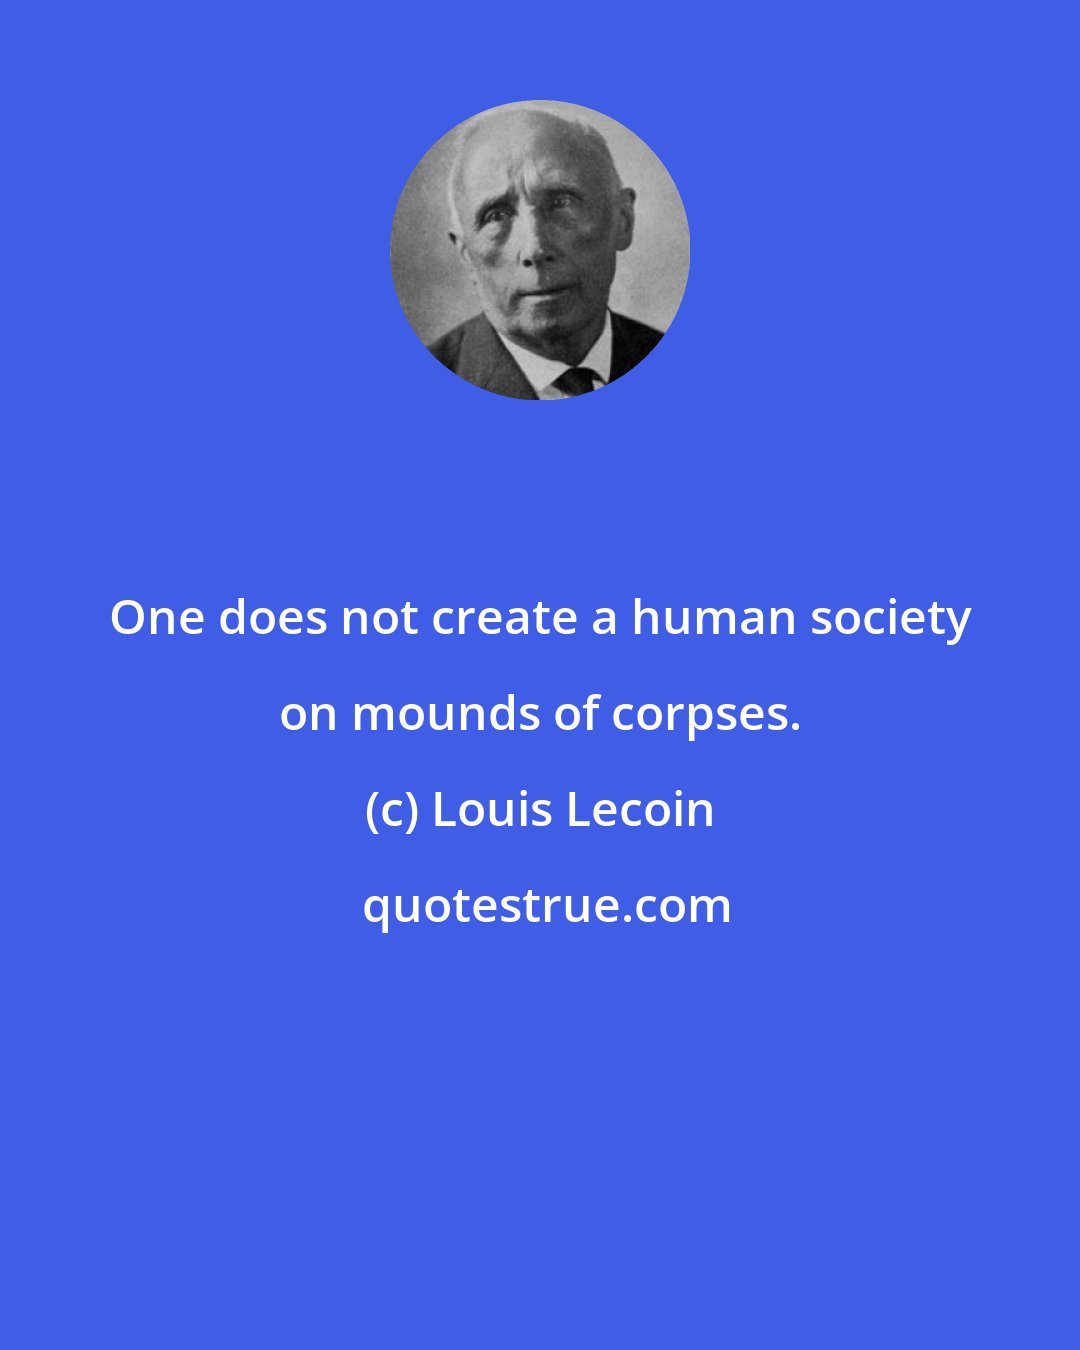 Louis Lecoin: One does not create a human society on mounds of corpses.